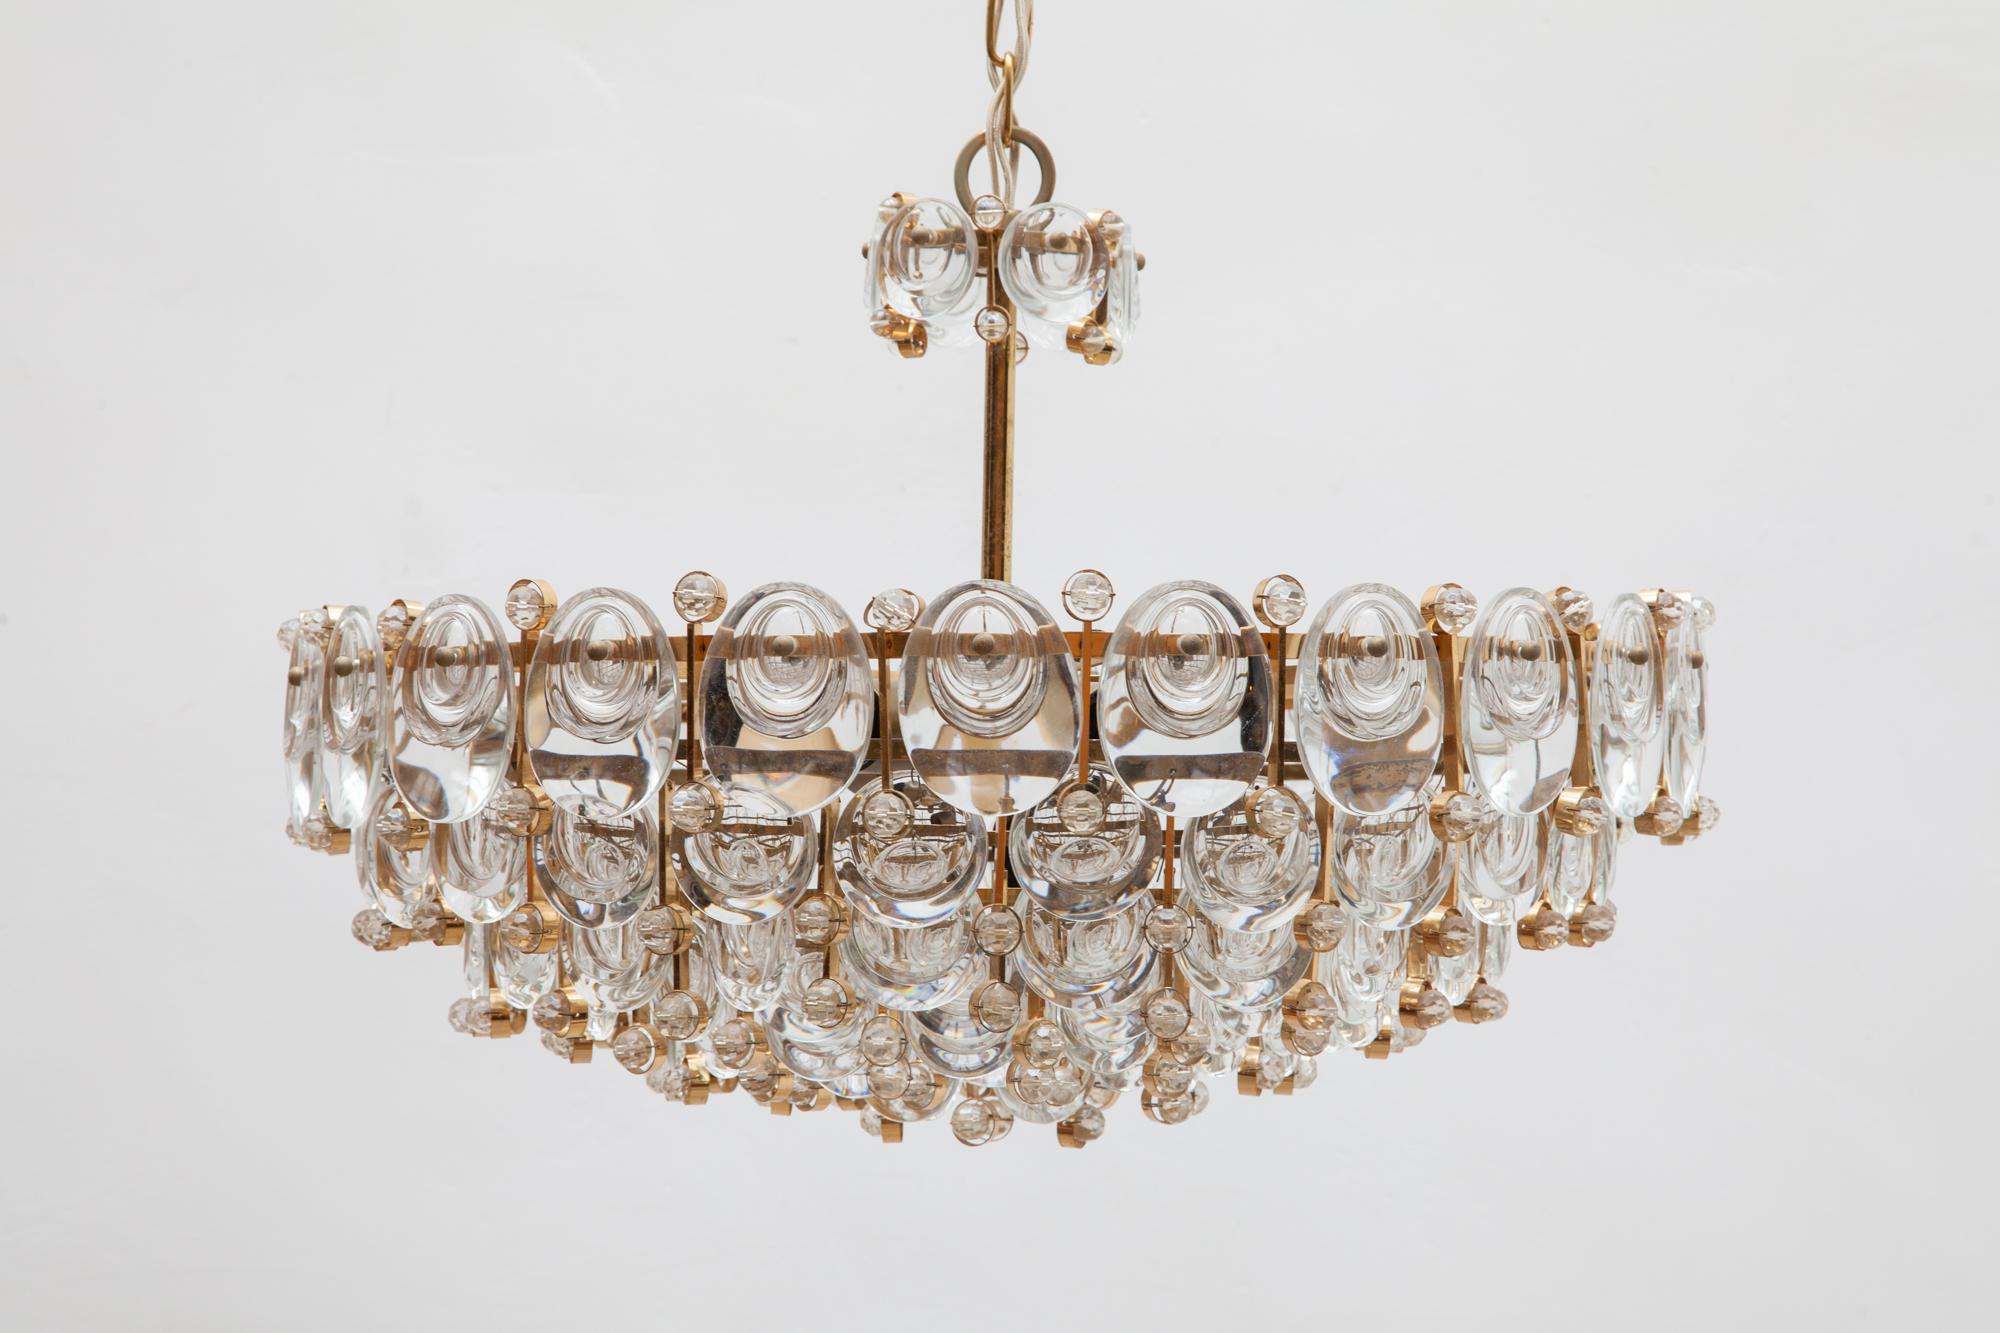 Palwa chandelier seven-tier design with eight lights a gilded brass. A circular structure comprised of small and large rings with dangling optical glass lens crystals inside. Created in Germany in the 1960s. With matching brass chain and flat simple